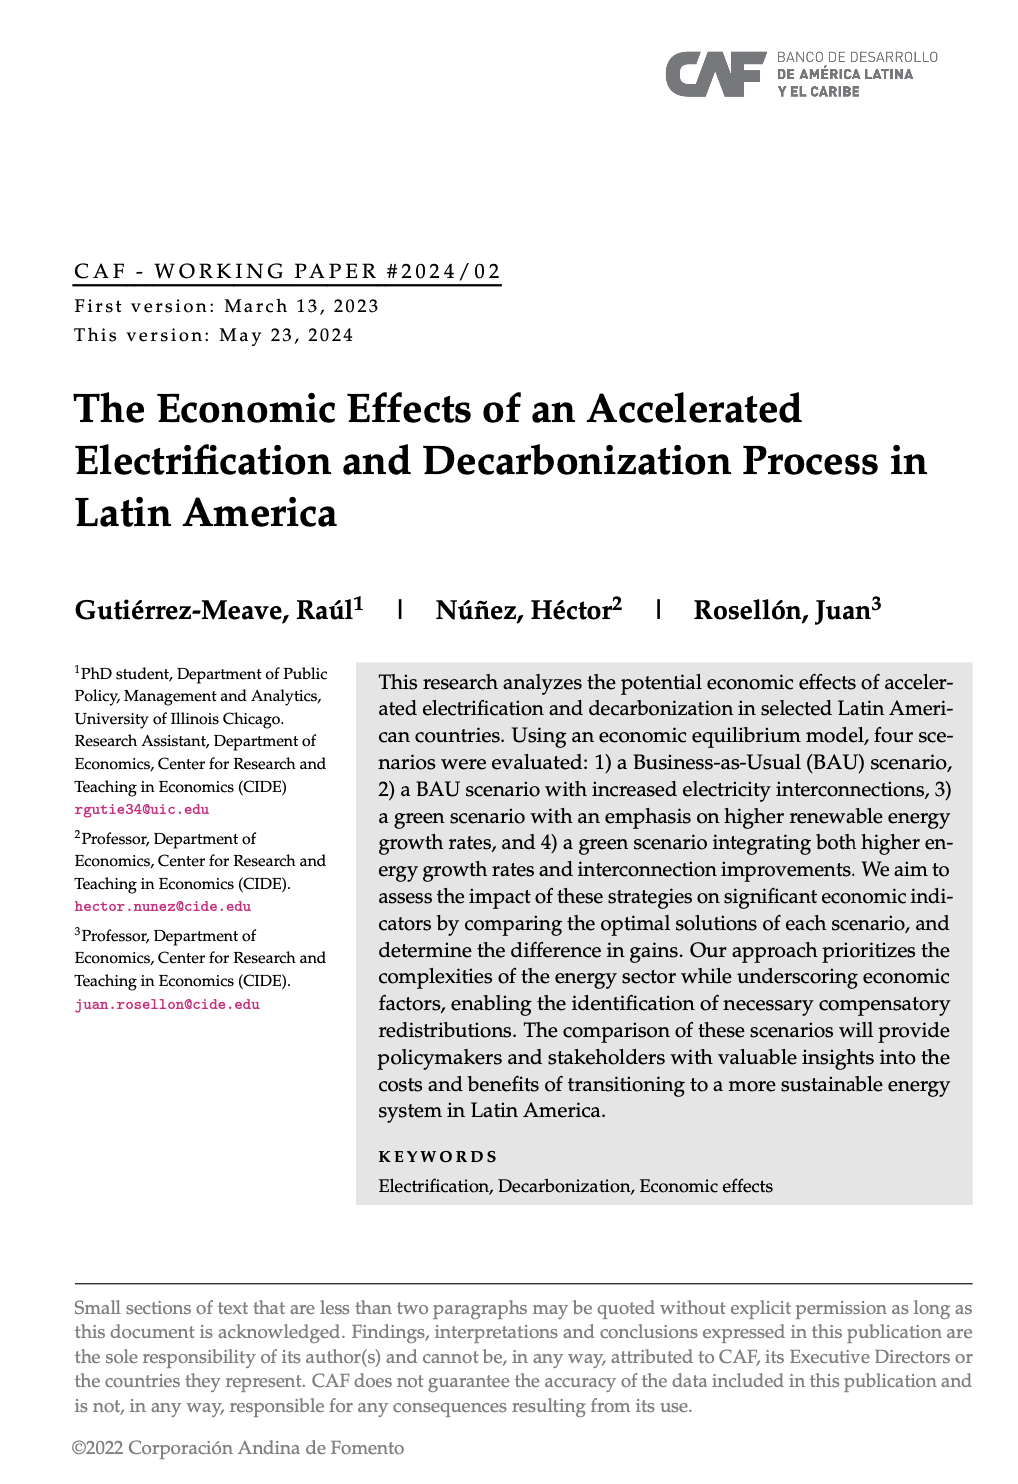 The Economic Effects of an Accelerated Electrification and Decarbonization Process in Latin America